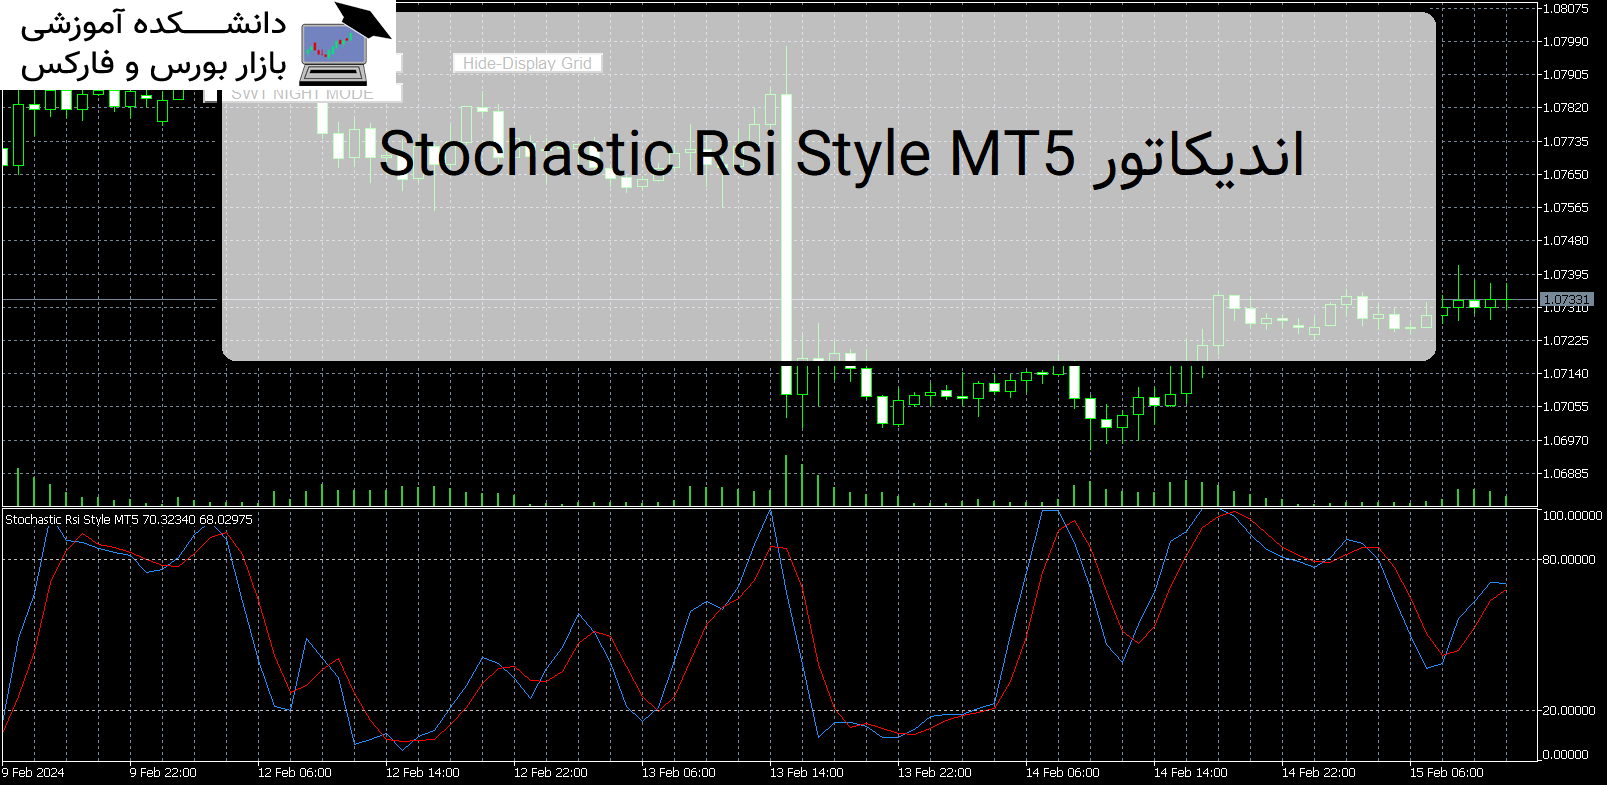 Stochastic Rsi Style MT5 اندیکاتور